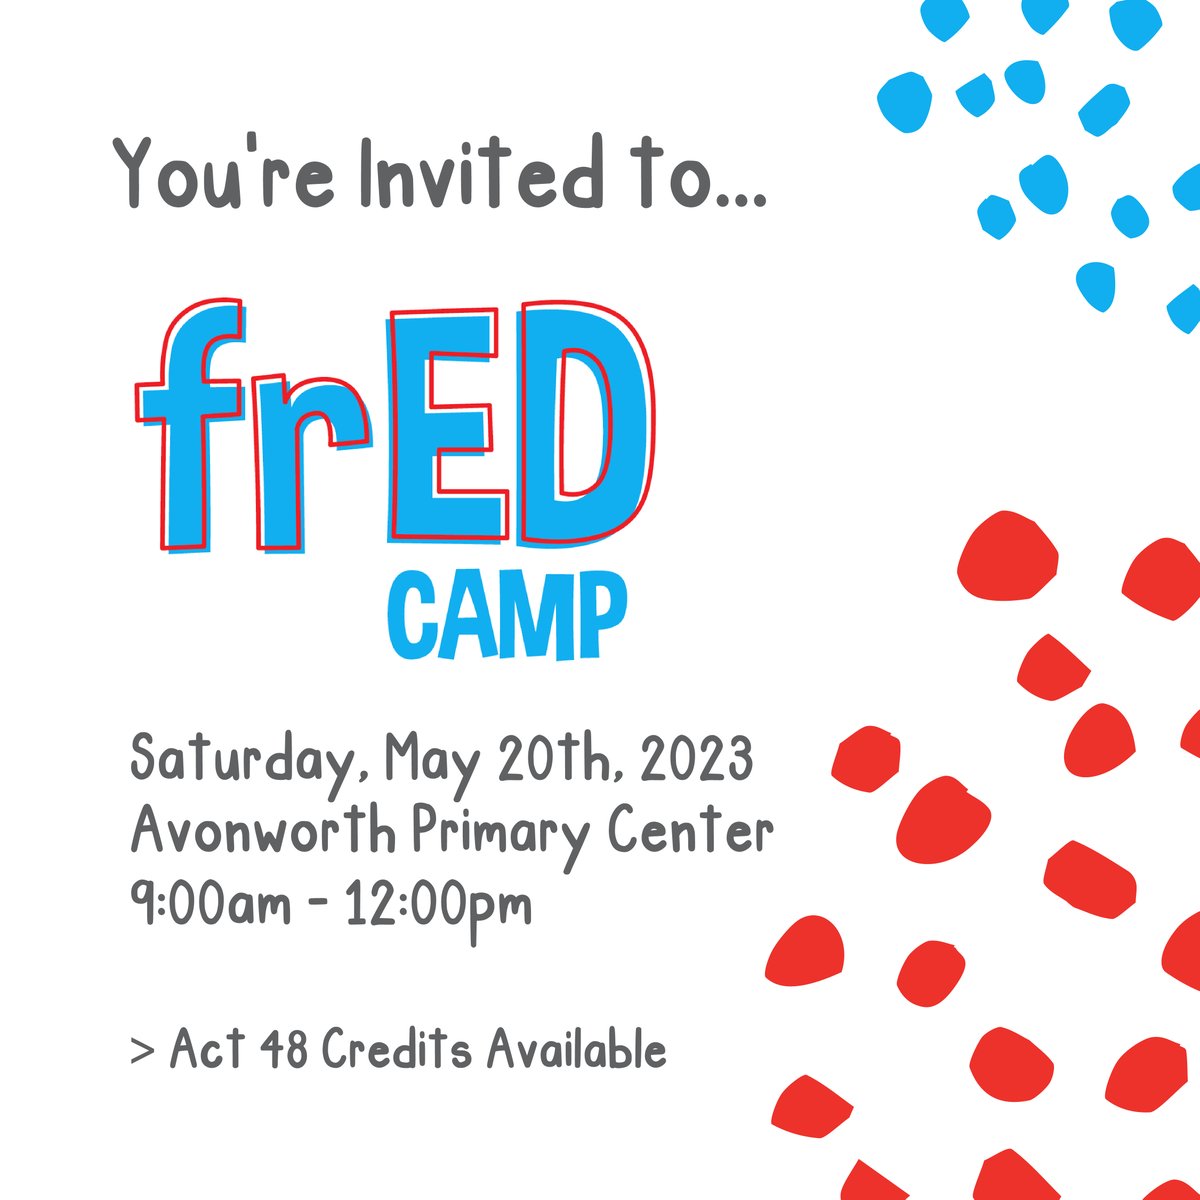 We hope to see you on May 20 at frED Camp - a free professional development event for every kind of educator, hosted by @remakelearning! 
 
Learn more: remakelearningdays.org/event/fred-cam…
 
Register: eventbrite.com/e/fred-camp-ti…